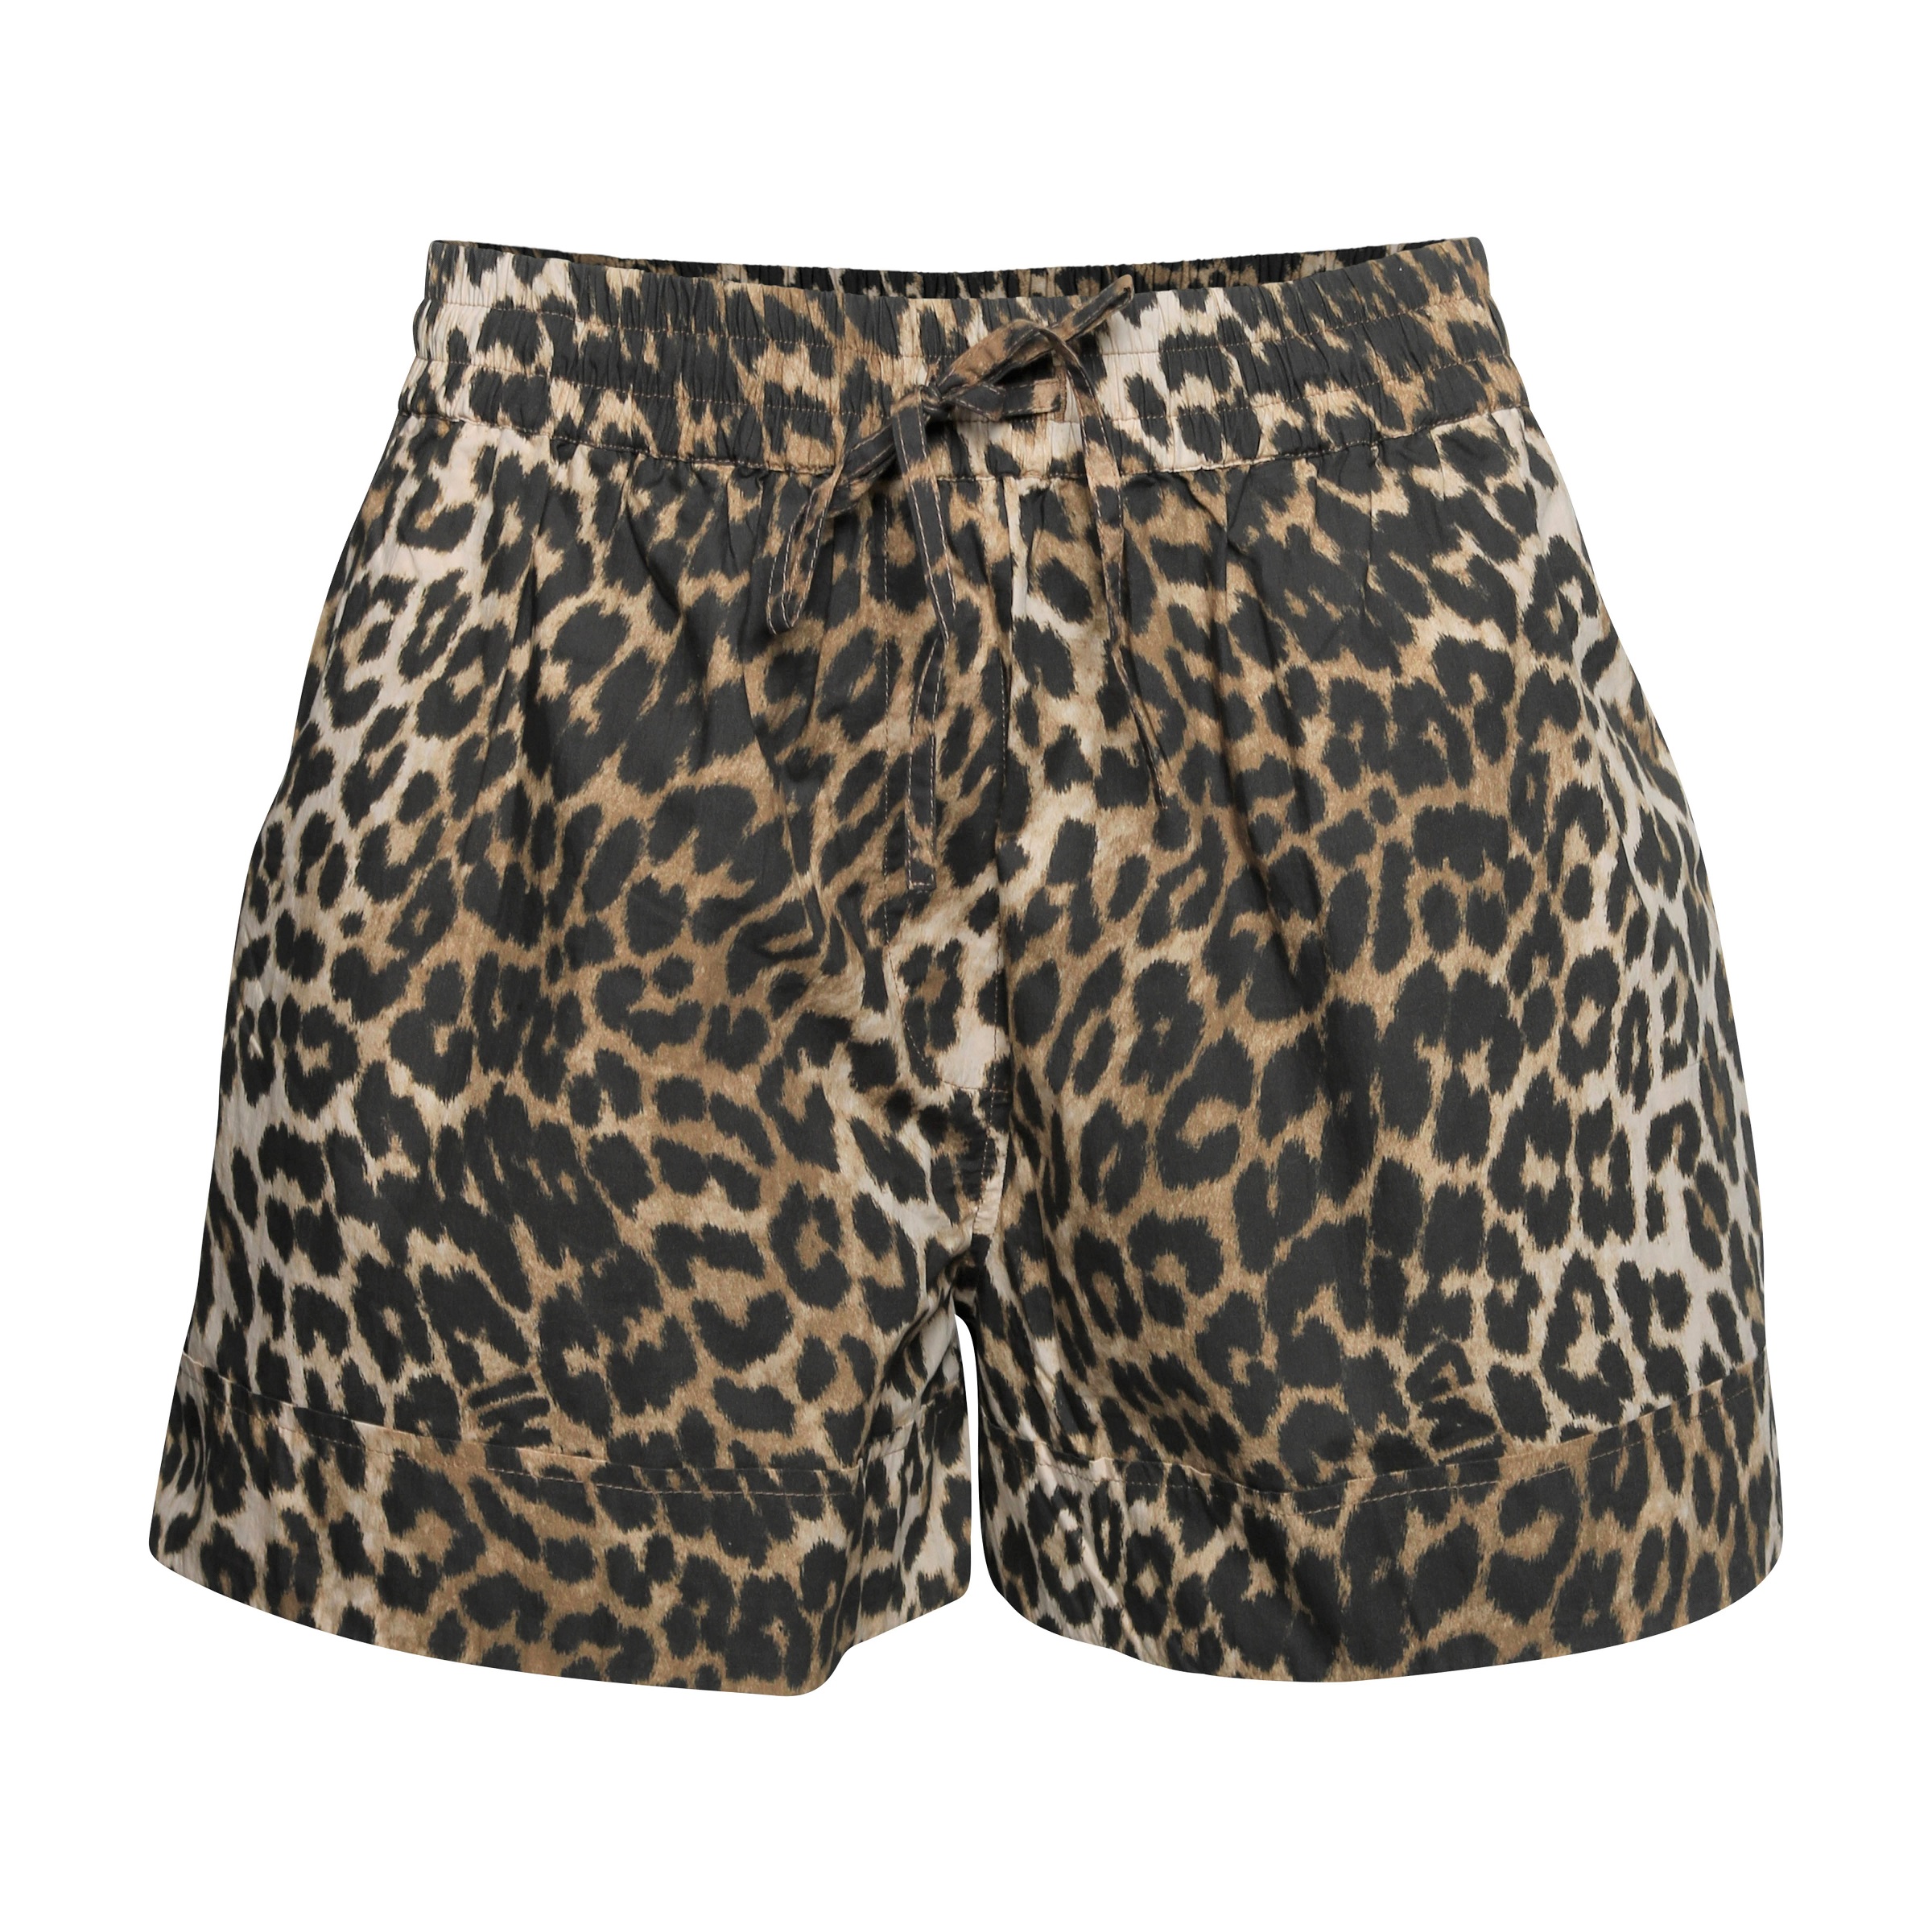 GANNI Printed Cotton Elasticated Shorts in Leopard 36